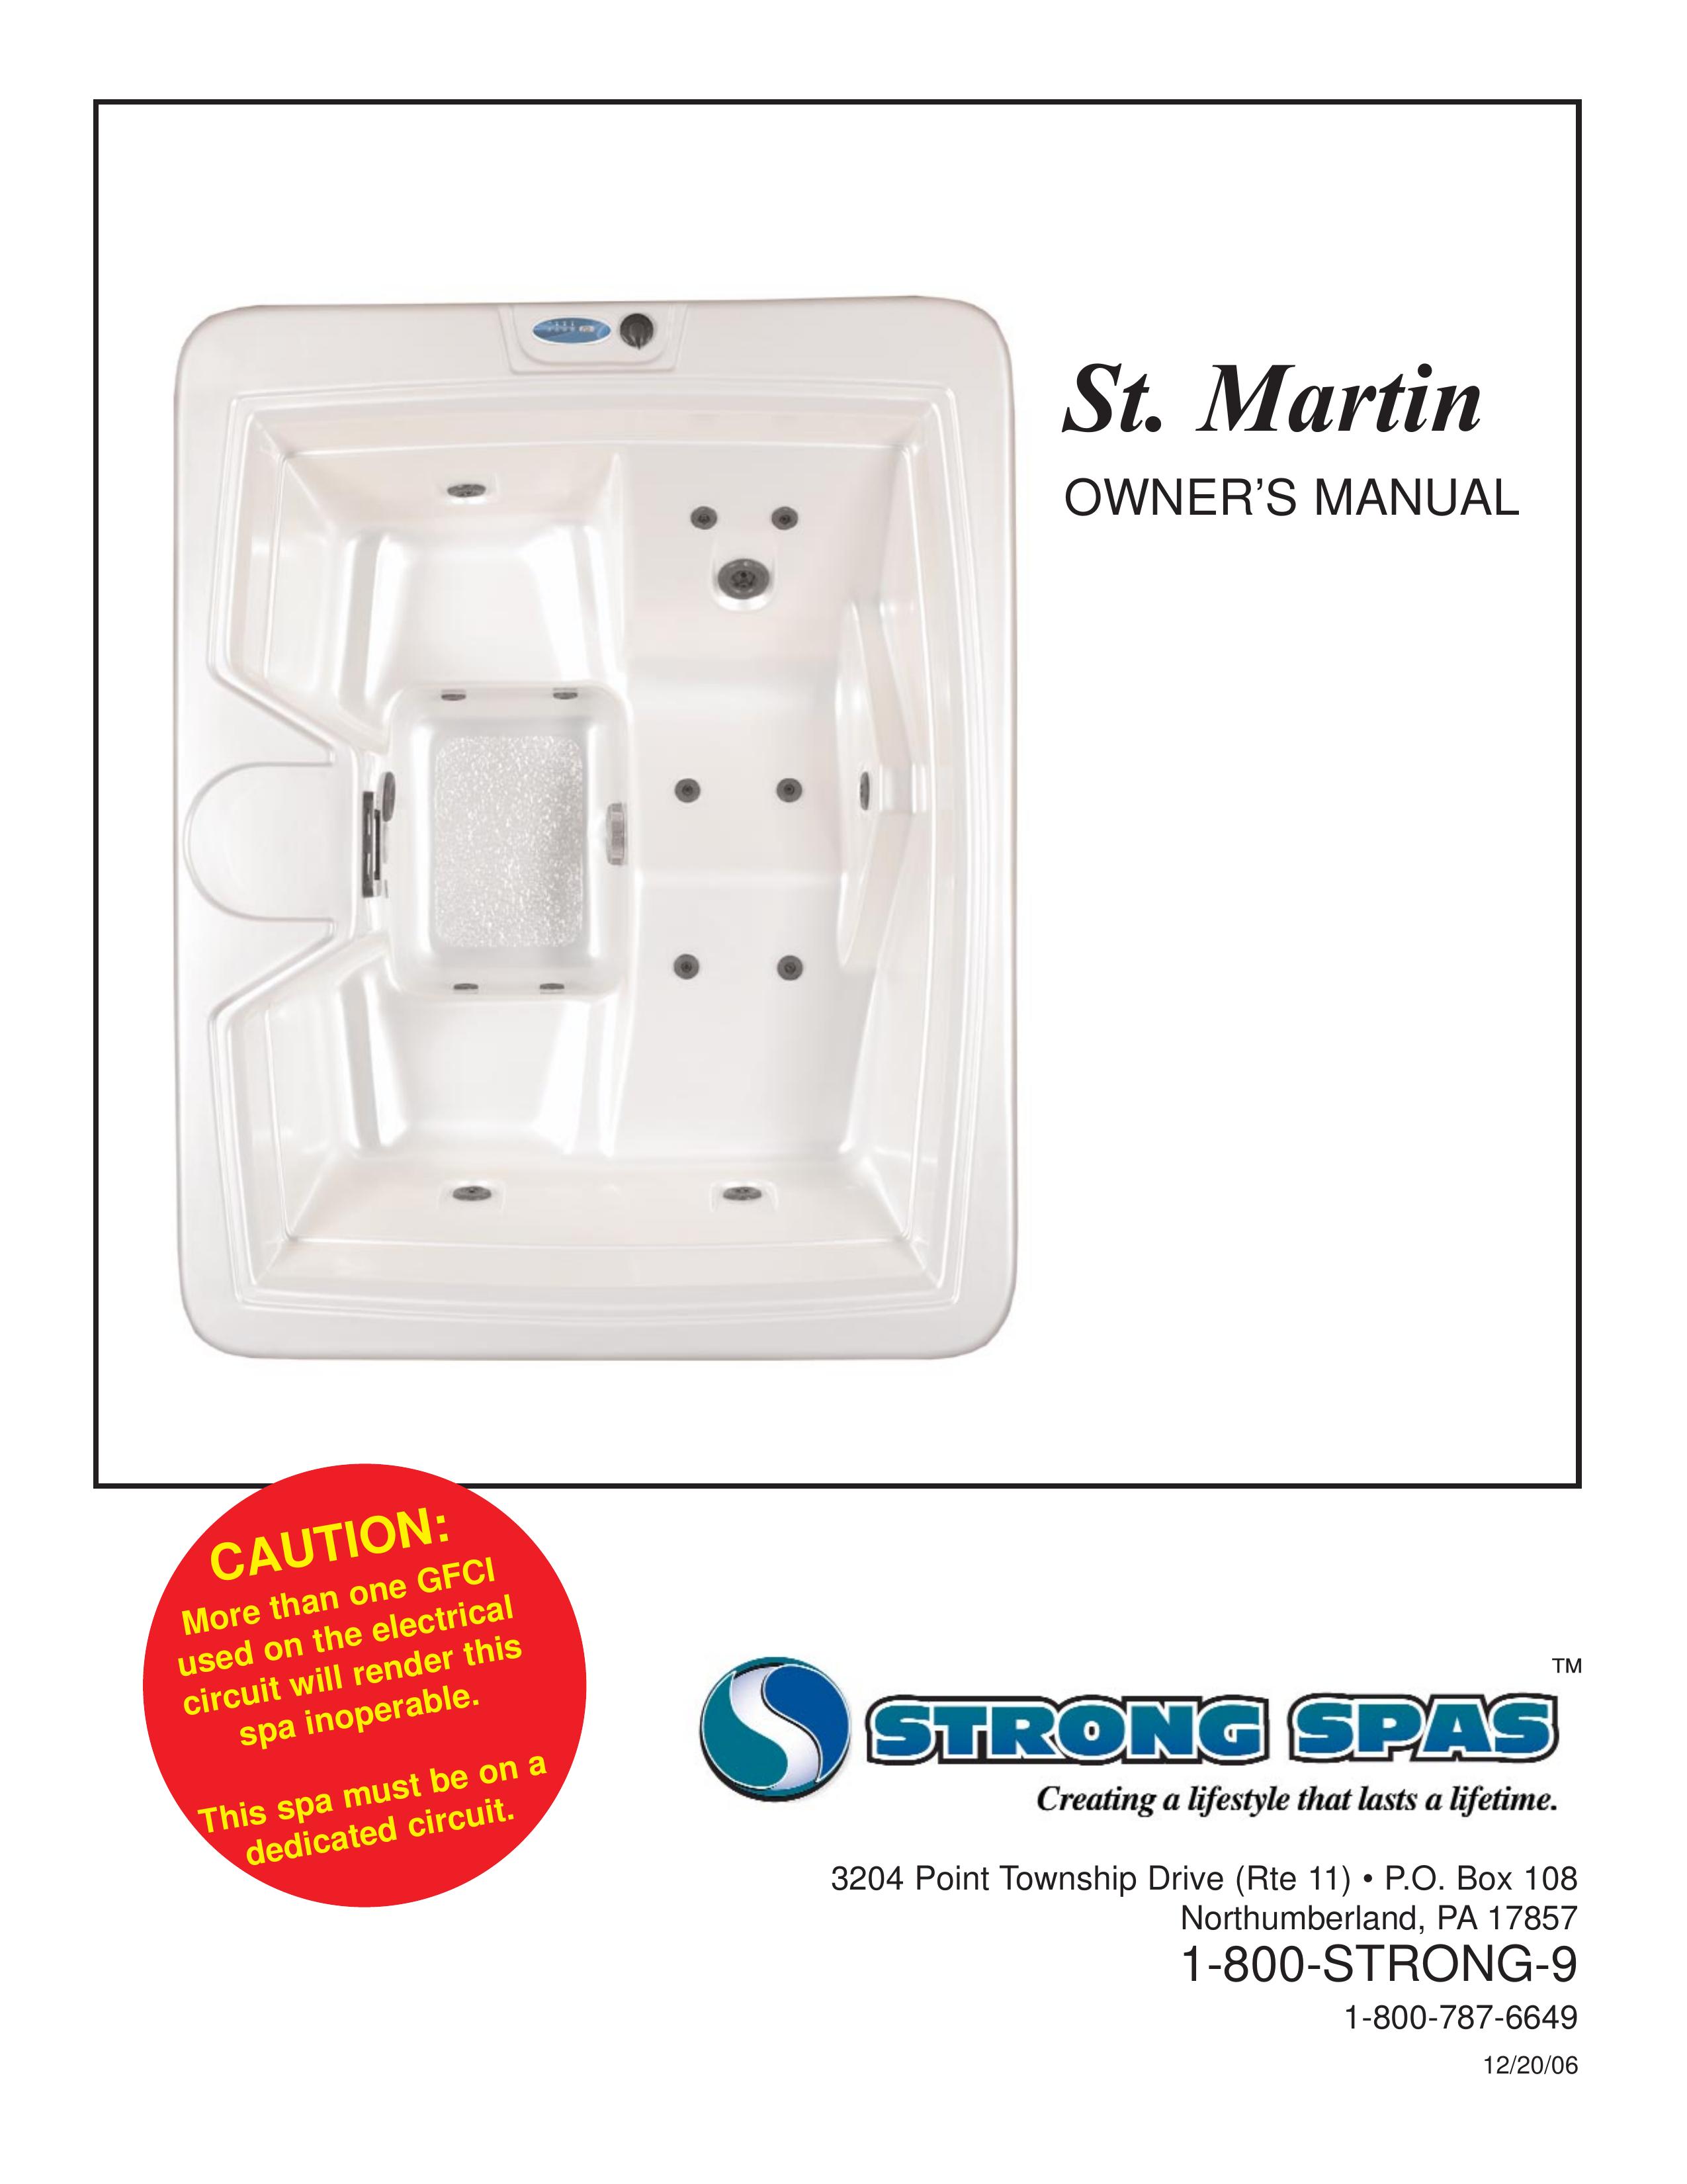 Strong Pools and Spas St. Martin Hot Tub User Manual